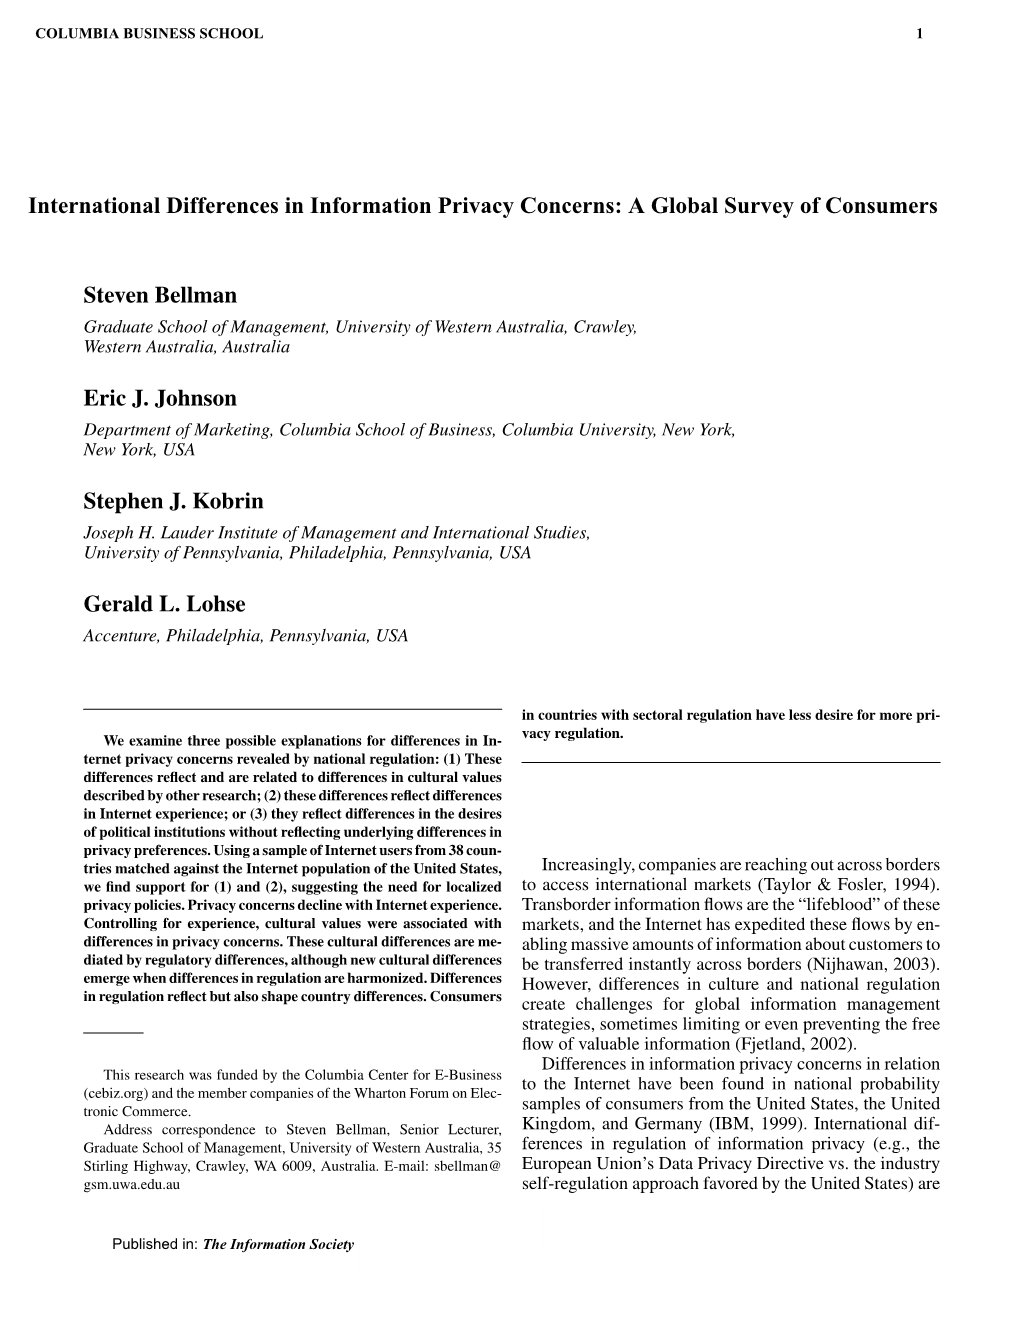 International Differences in Information Privacy Concerns